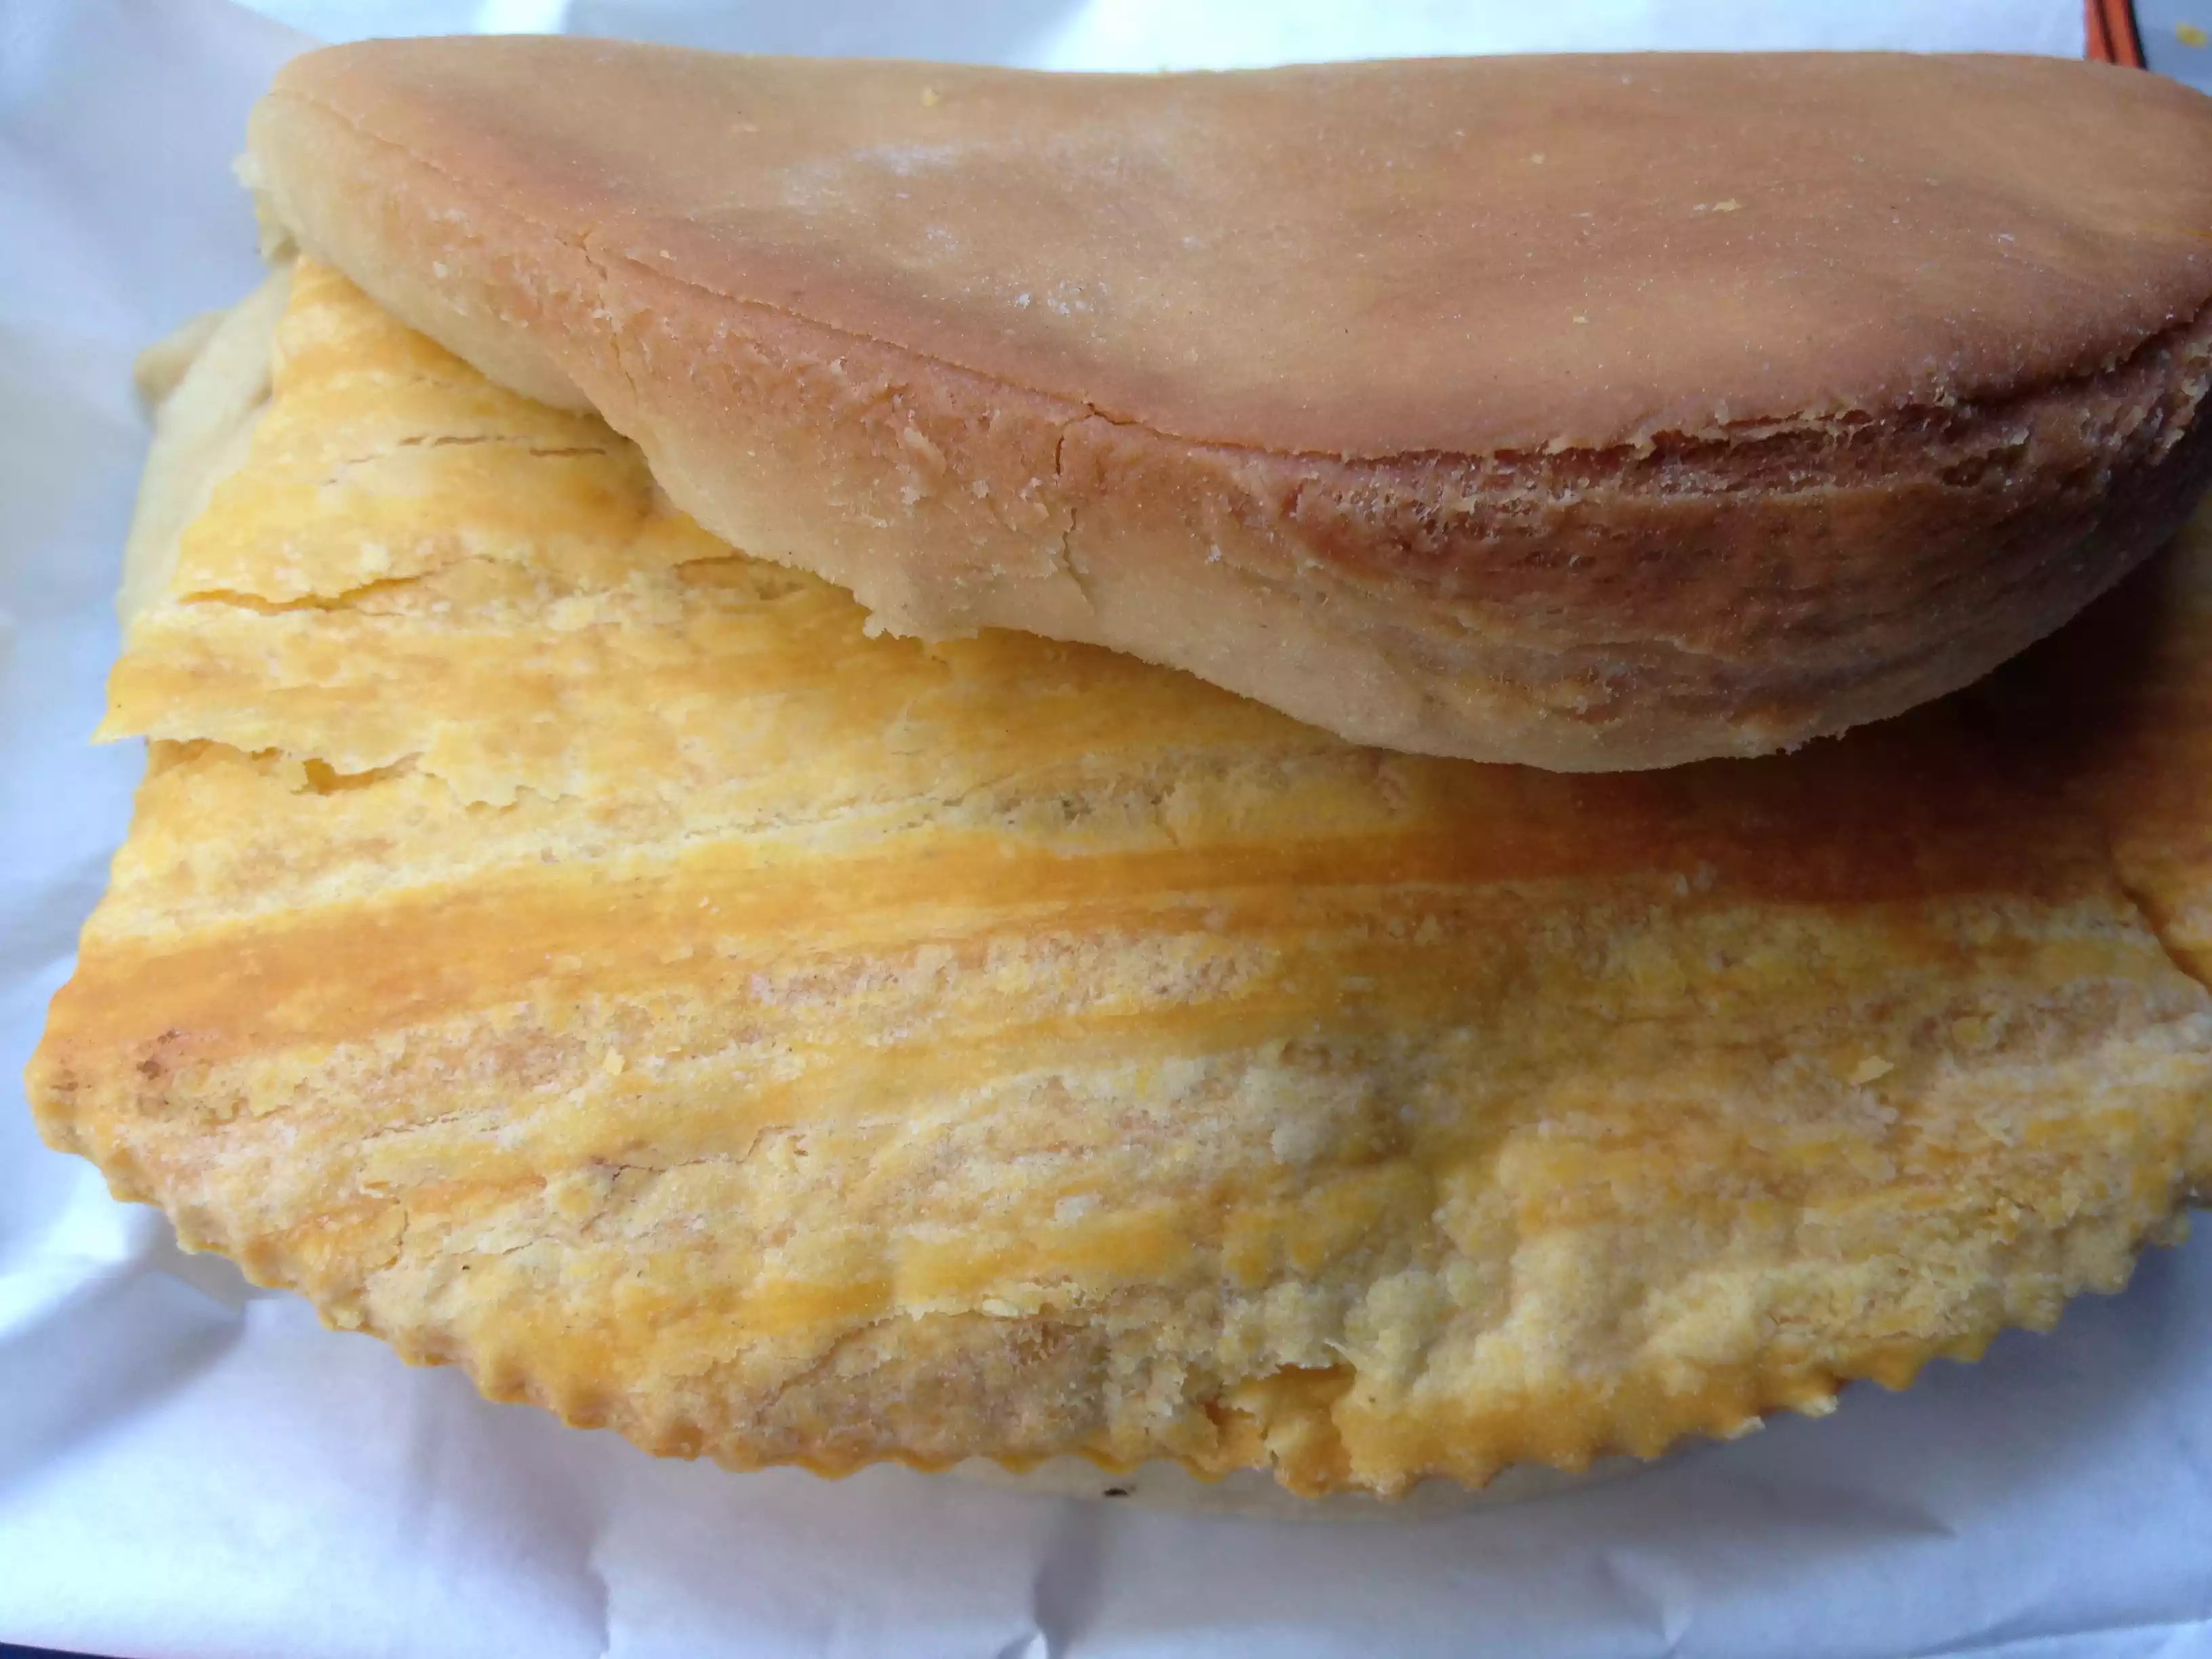 The Jamaican Beef Patty Extends Its Reach - The New York Times